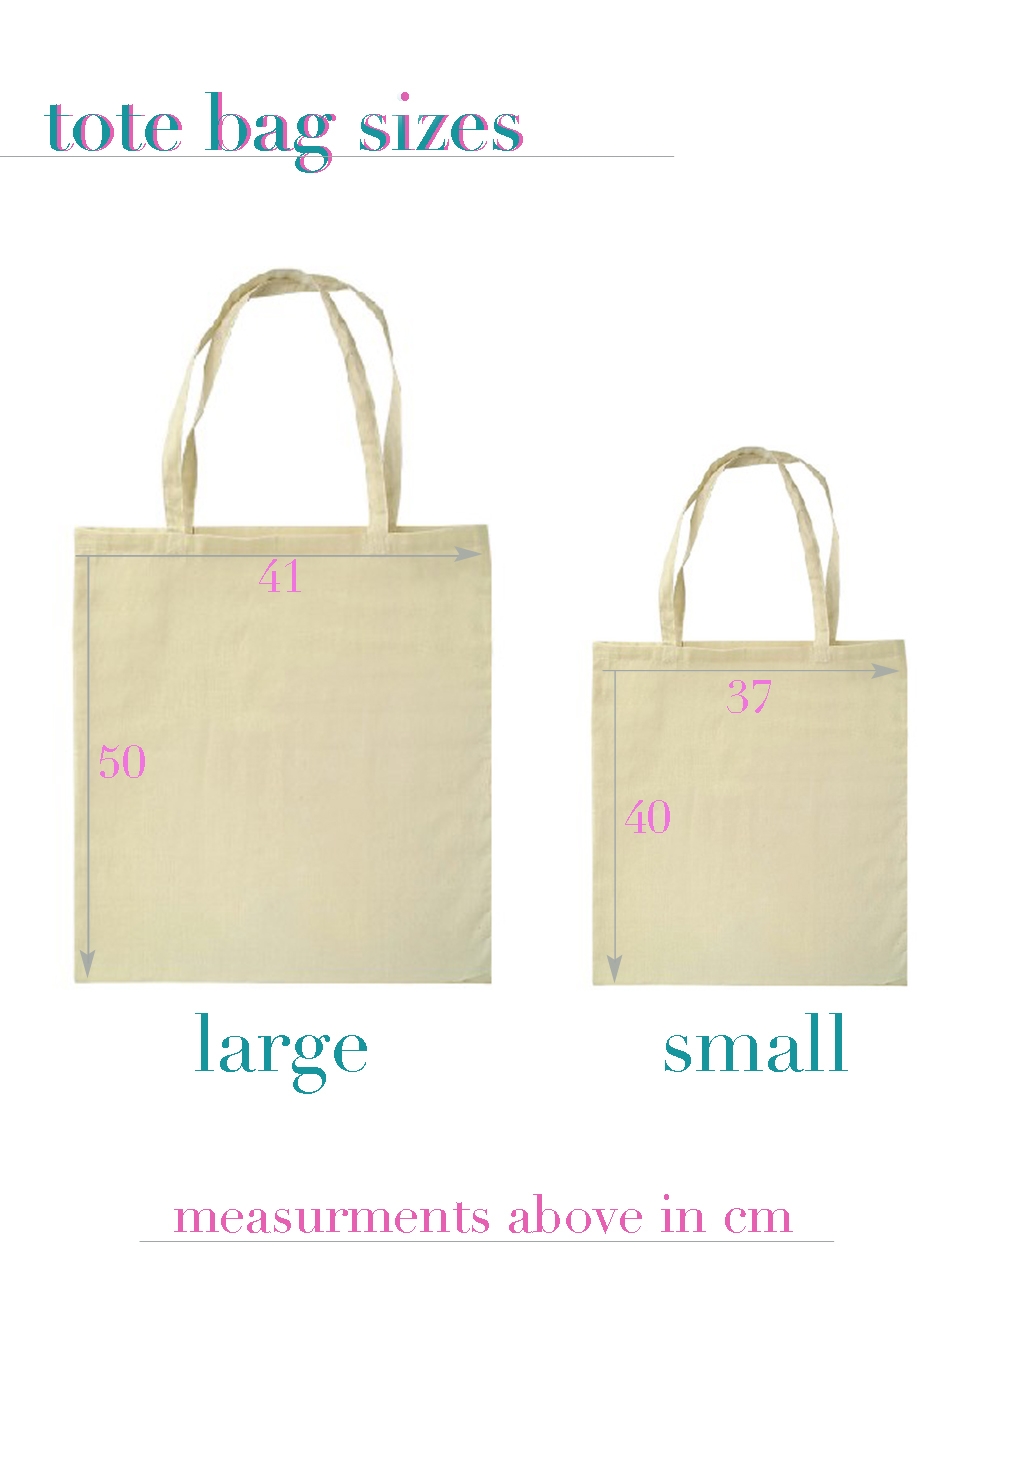 Standard Tote Bag Size | IUCN Water